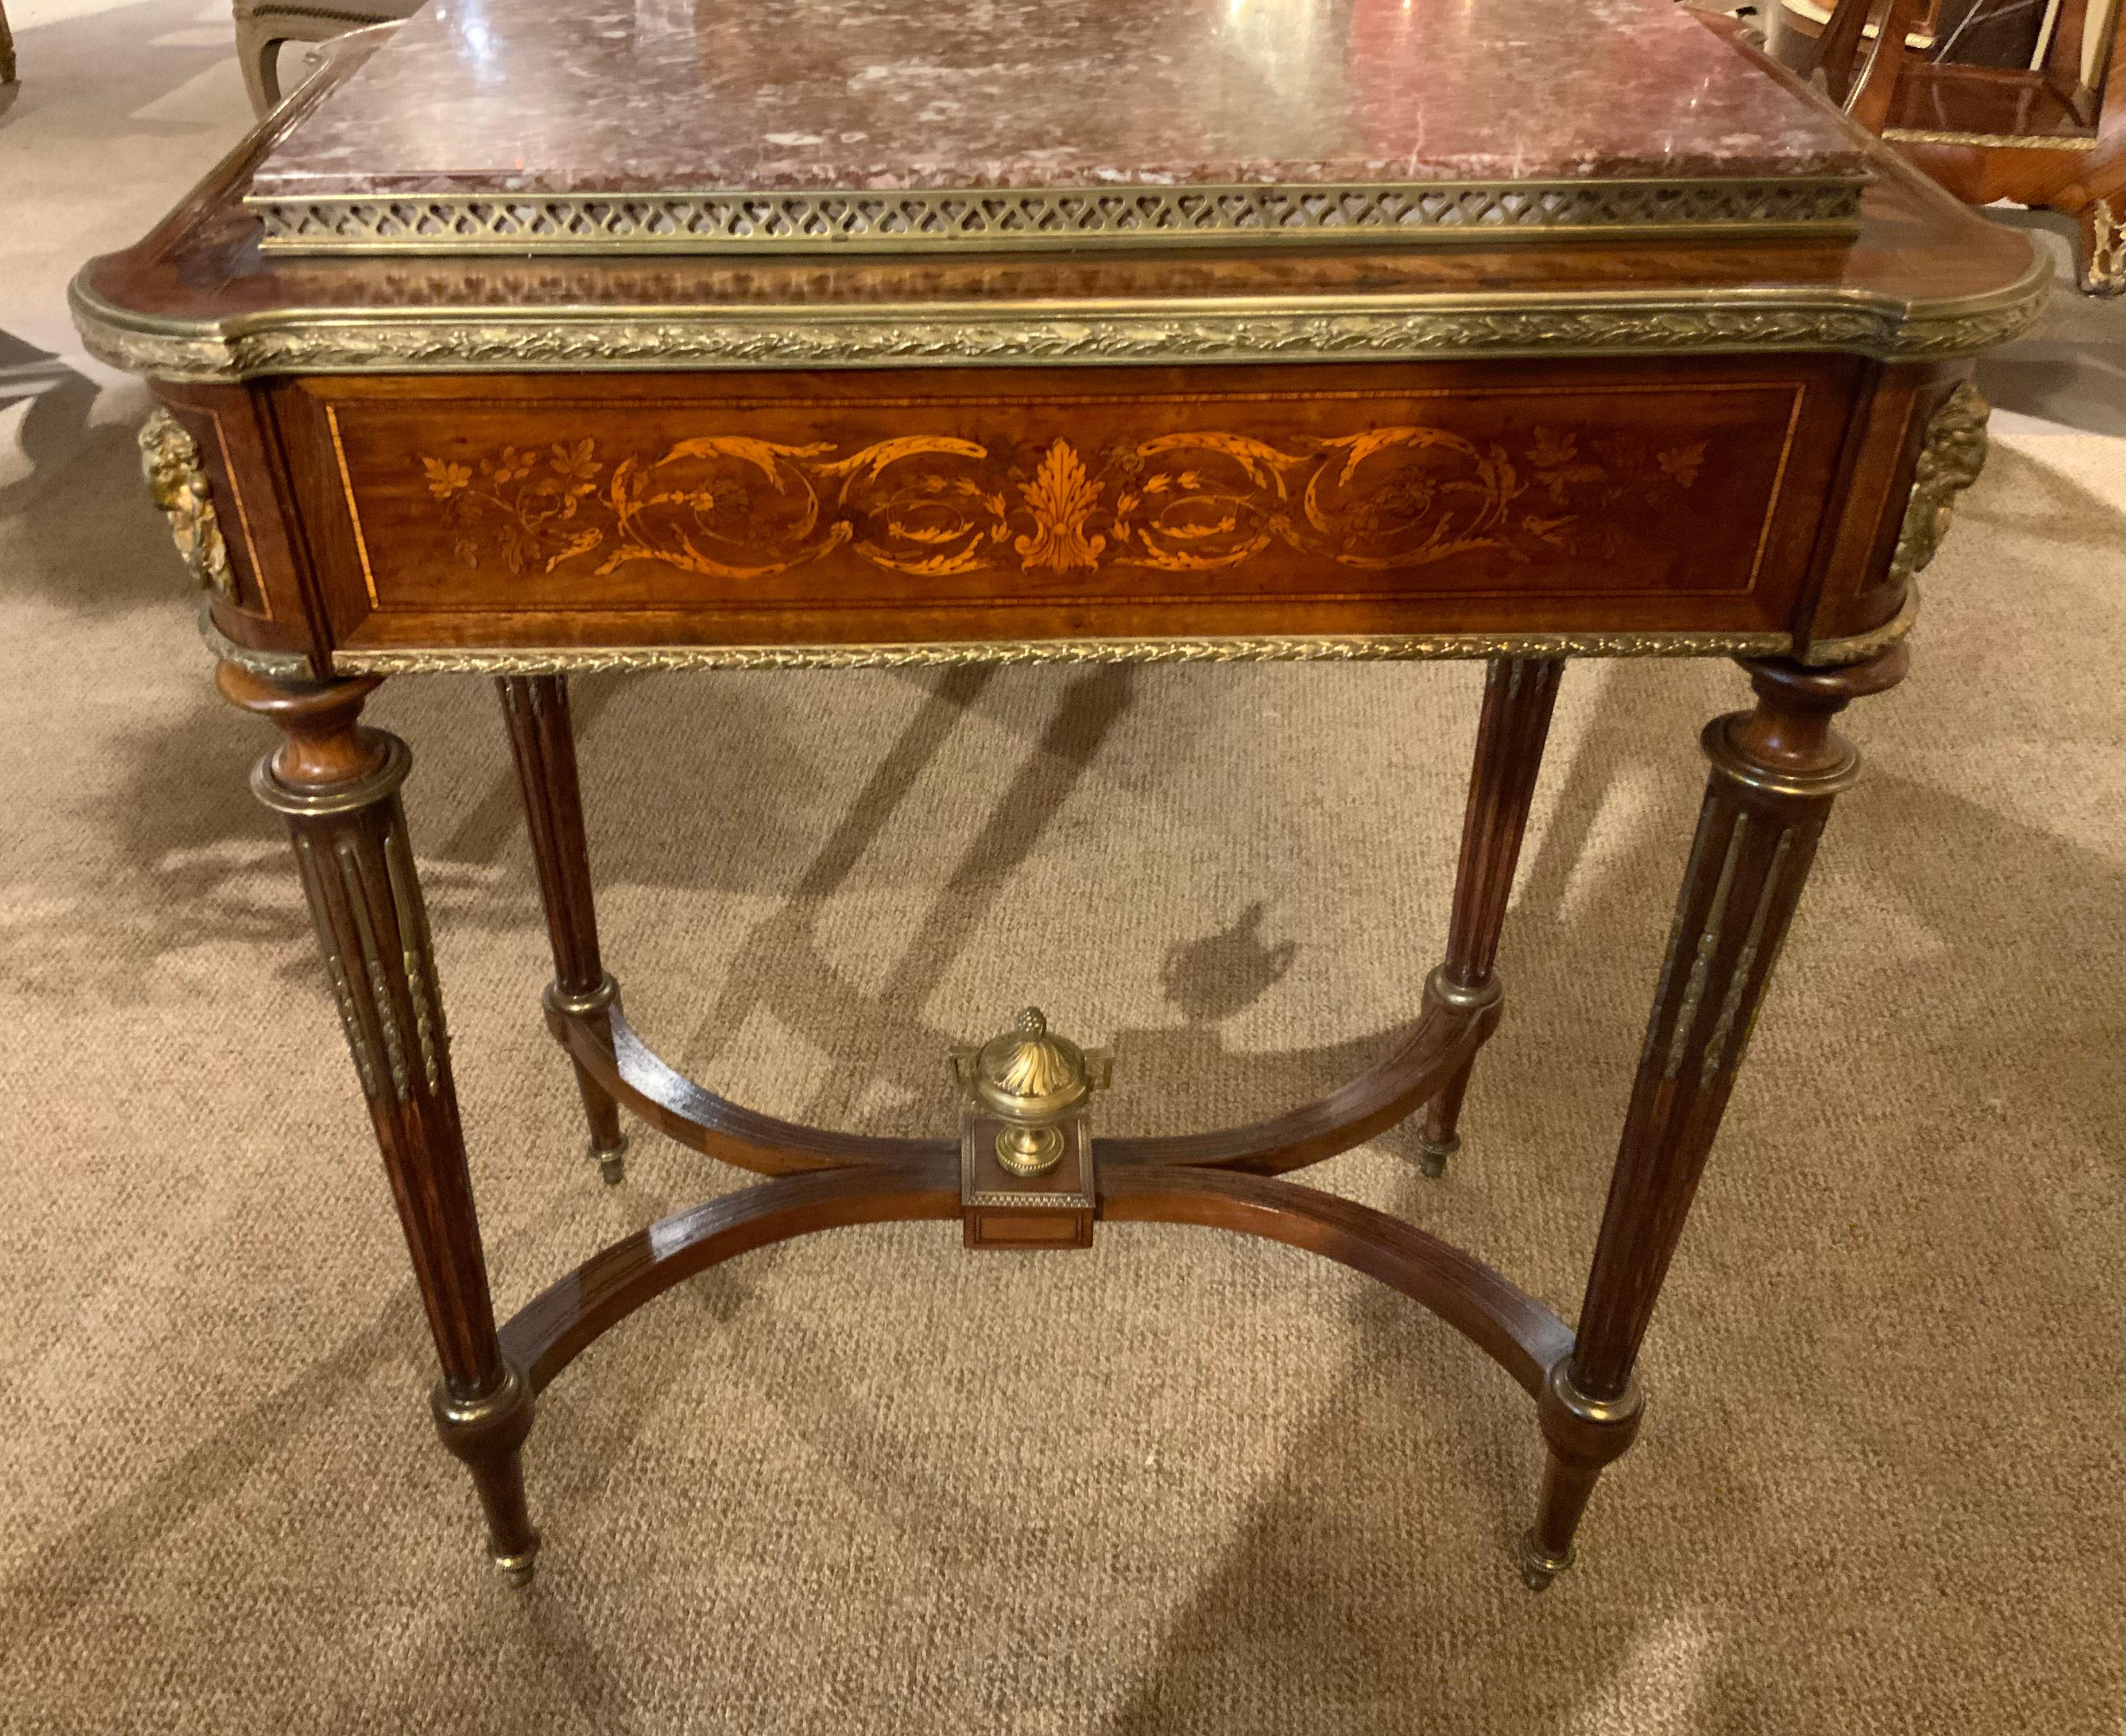 French Louis XVI-Style Table, 19th Century with Marquetry Inlay, Marble Top In Excellent Condition For Sale In Houston, TX